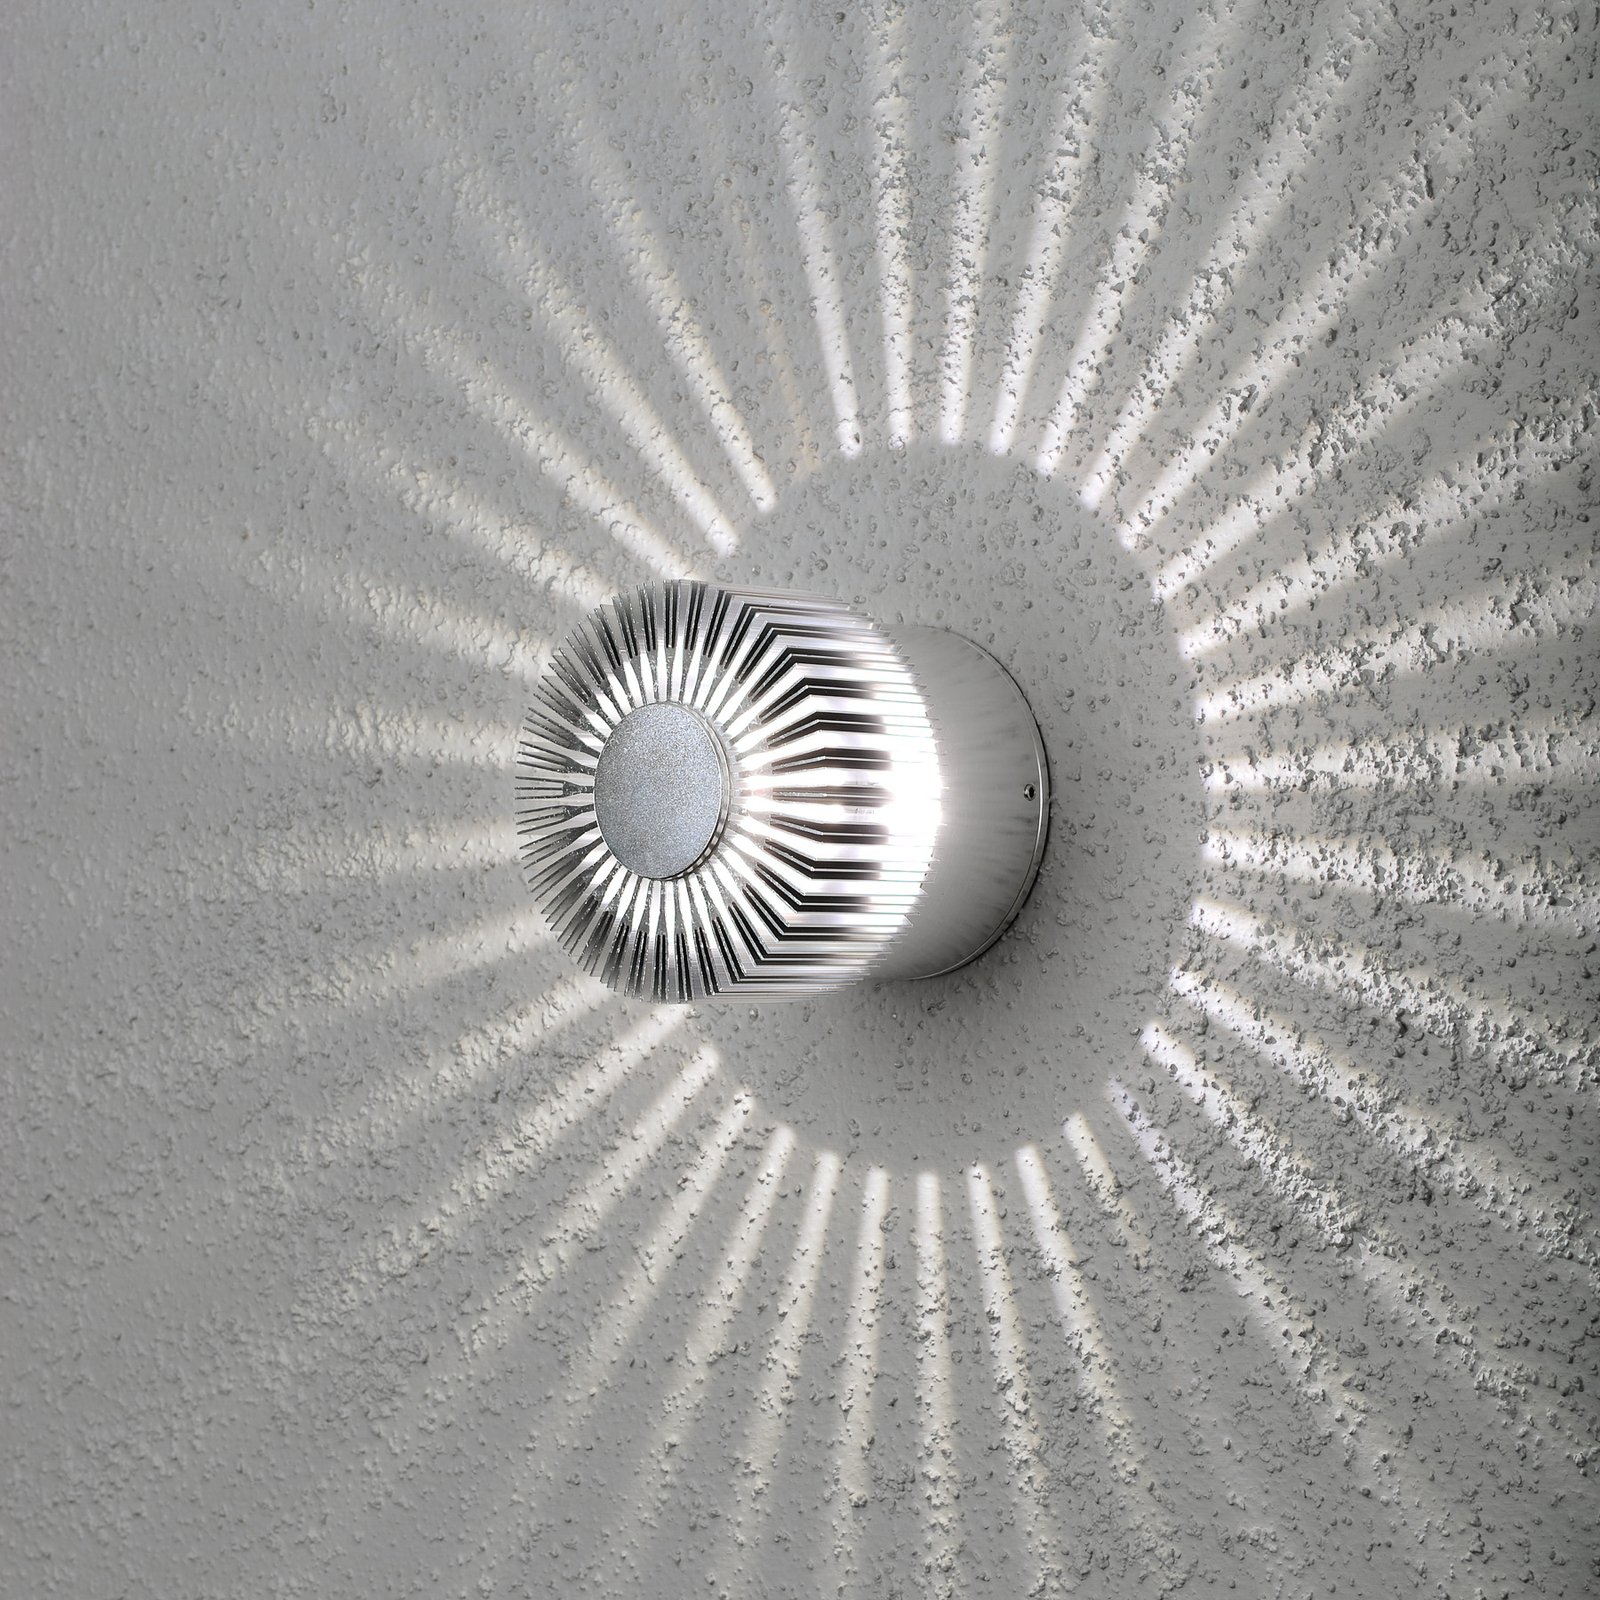 Monza LED outdoor wall light round silver 9 cm